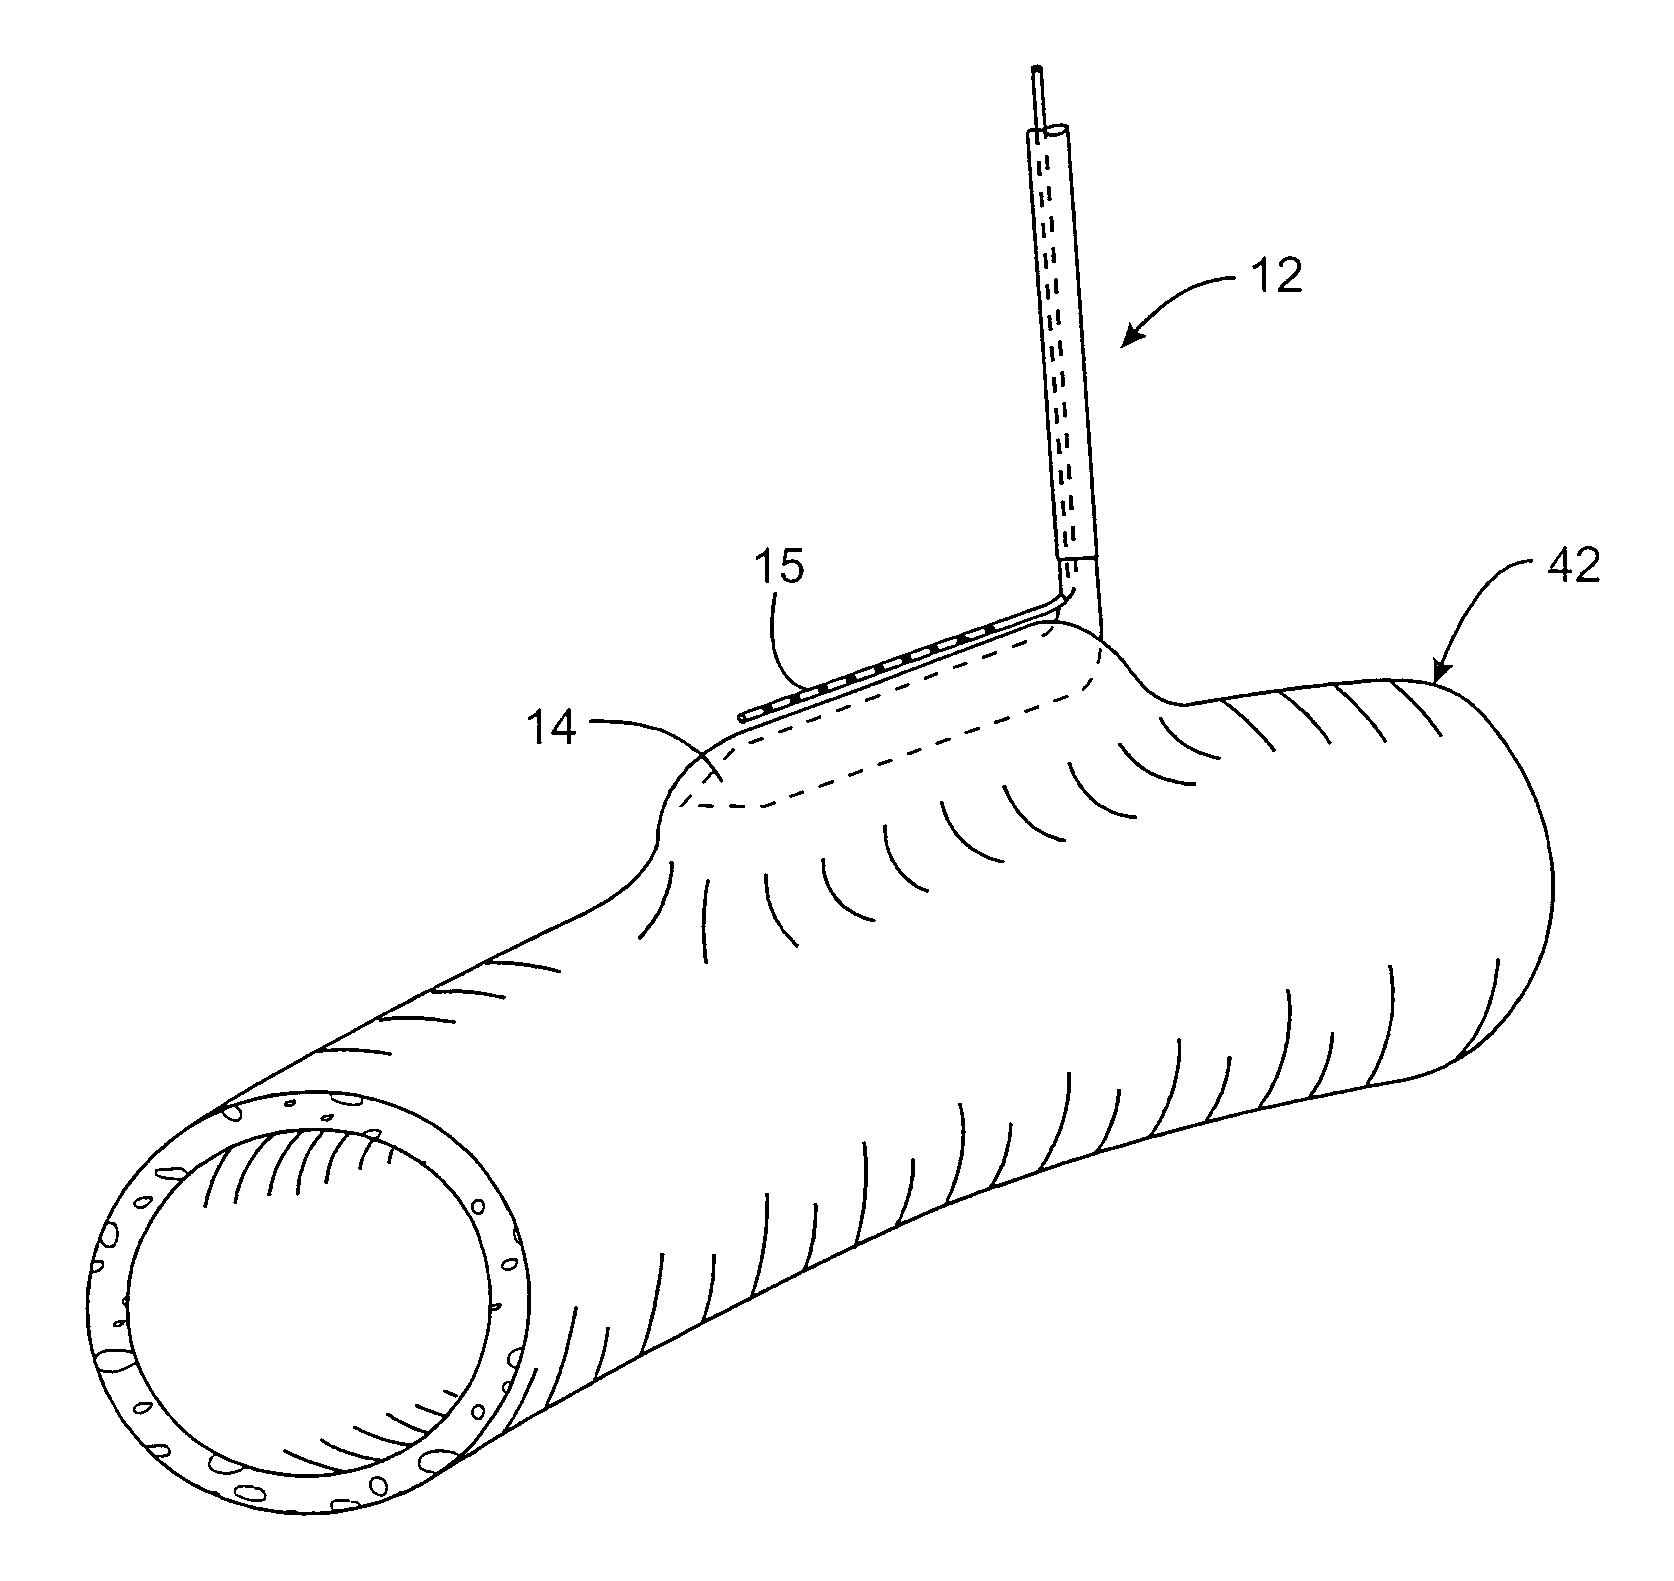 Tissue bonding system and method for controlling a tissue site during anastomosis